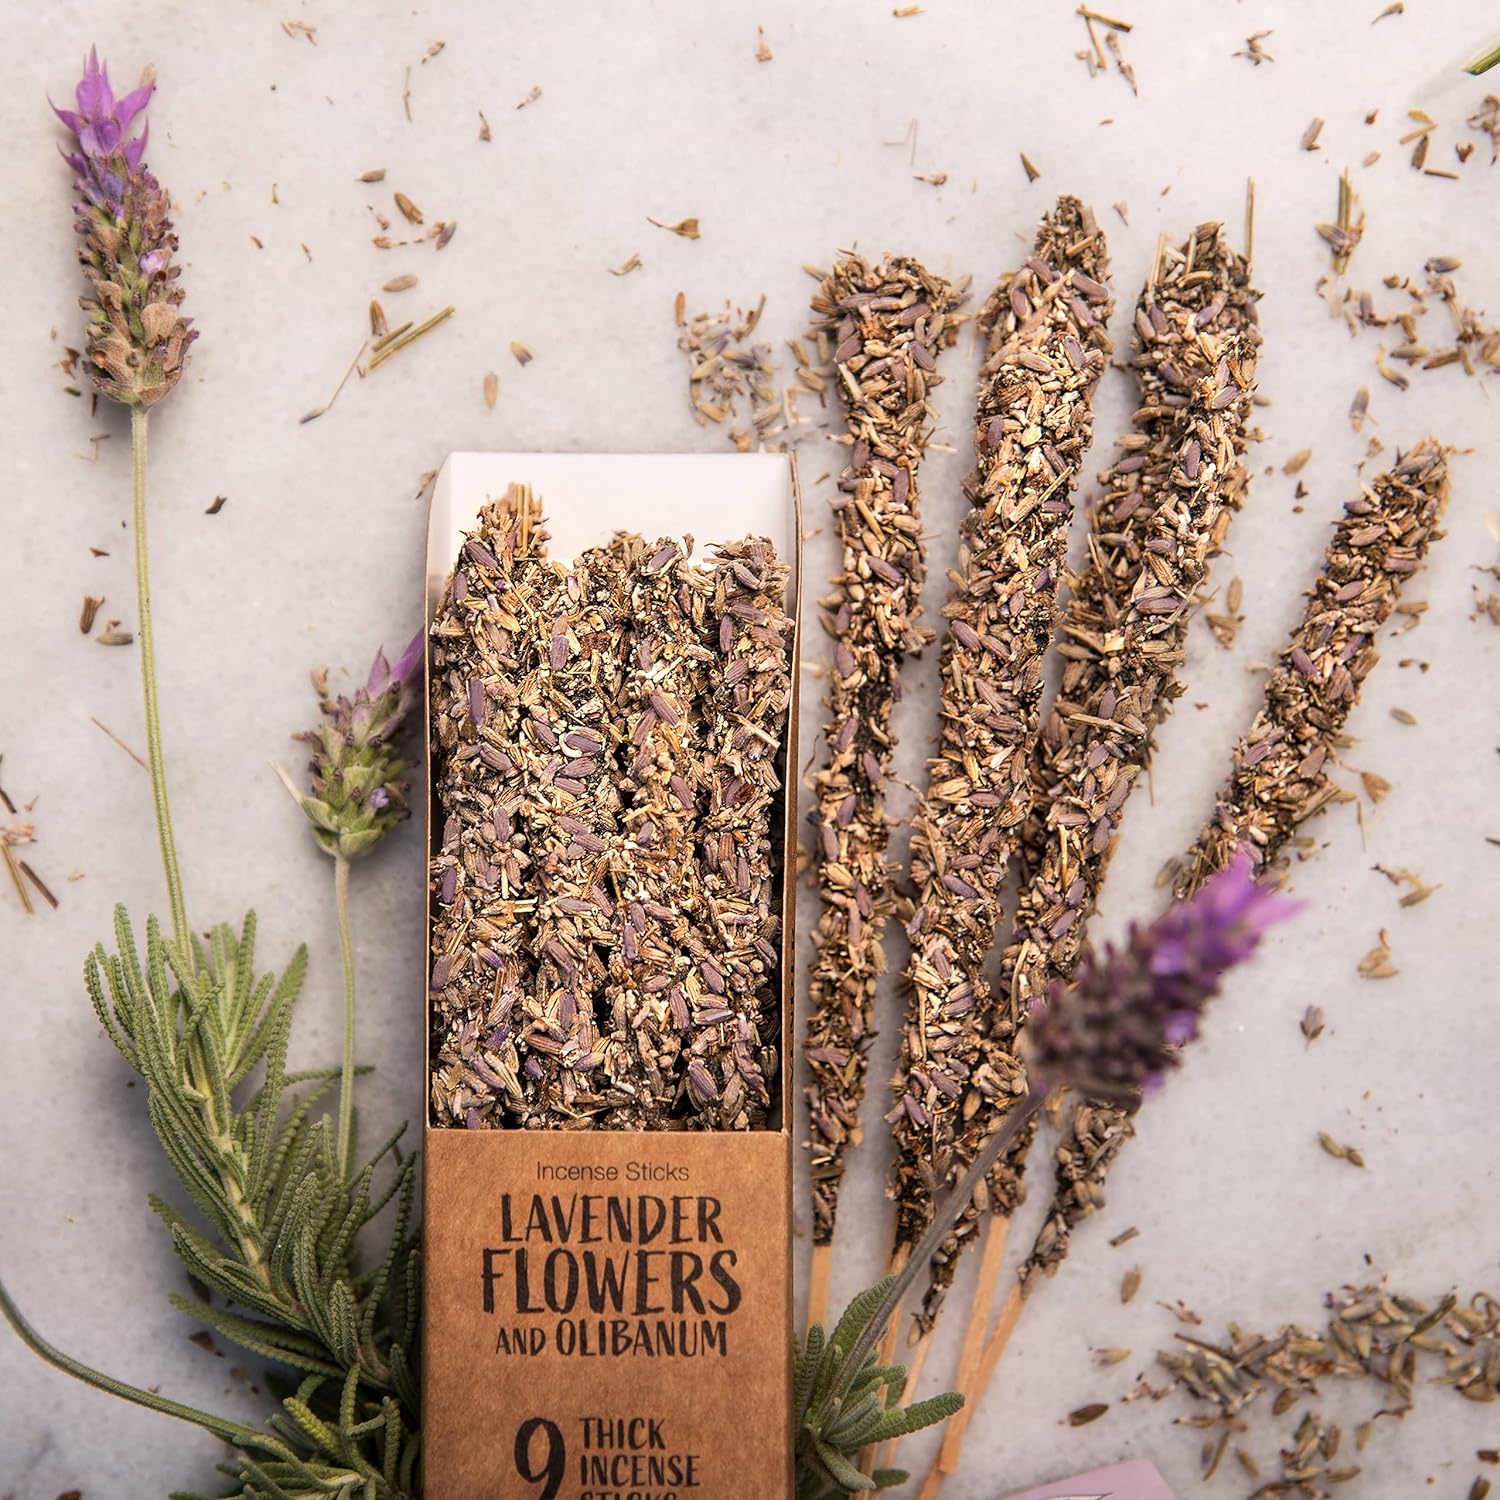 Sagrada Madre Lavender Natural Fine Incense Stick. 100% Sustainable. Natural Organic Herbs. Handcrafted. Vegan. Eco. Two Boxes of 9 Units Each. 18 Units in Total. Made in Argentina.